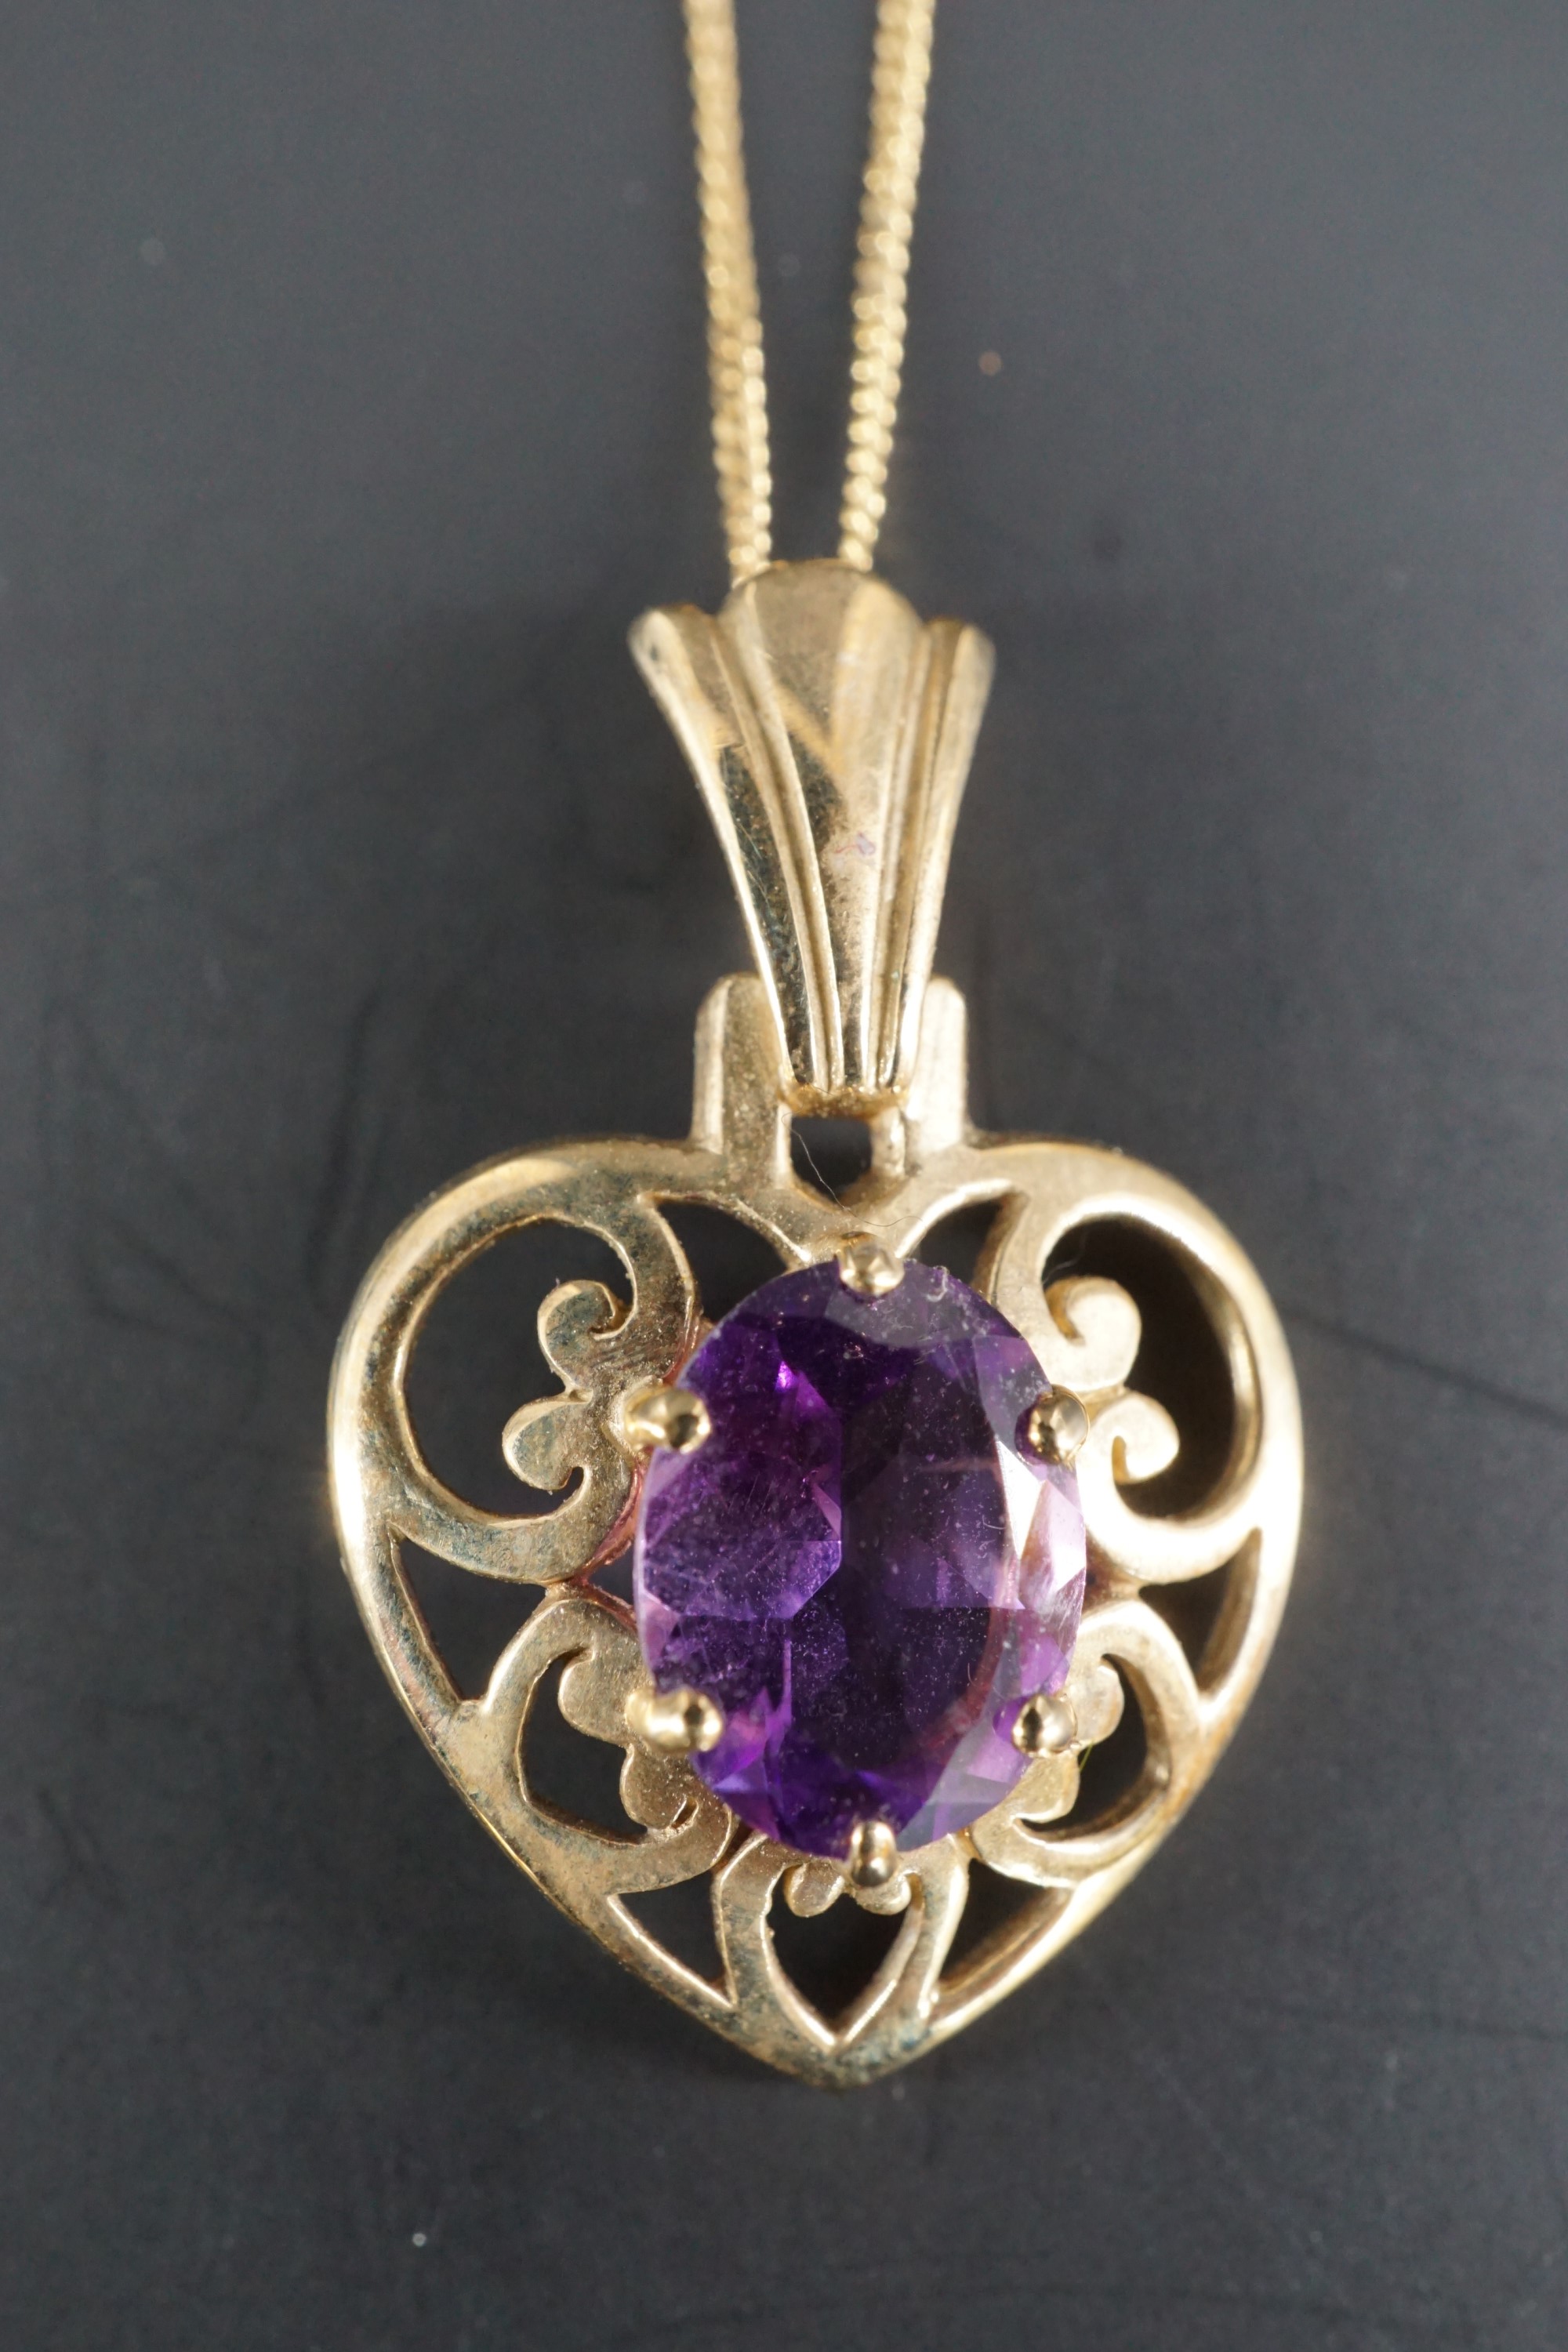 An amethyst and 9 ct gold open heart shaped pendant and fine 9 K neck chain, 22 mm, 2.1 g